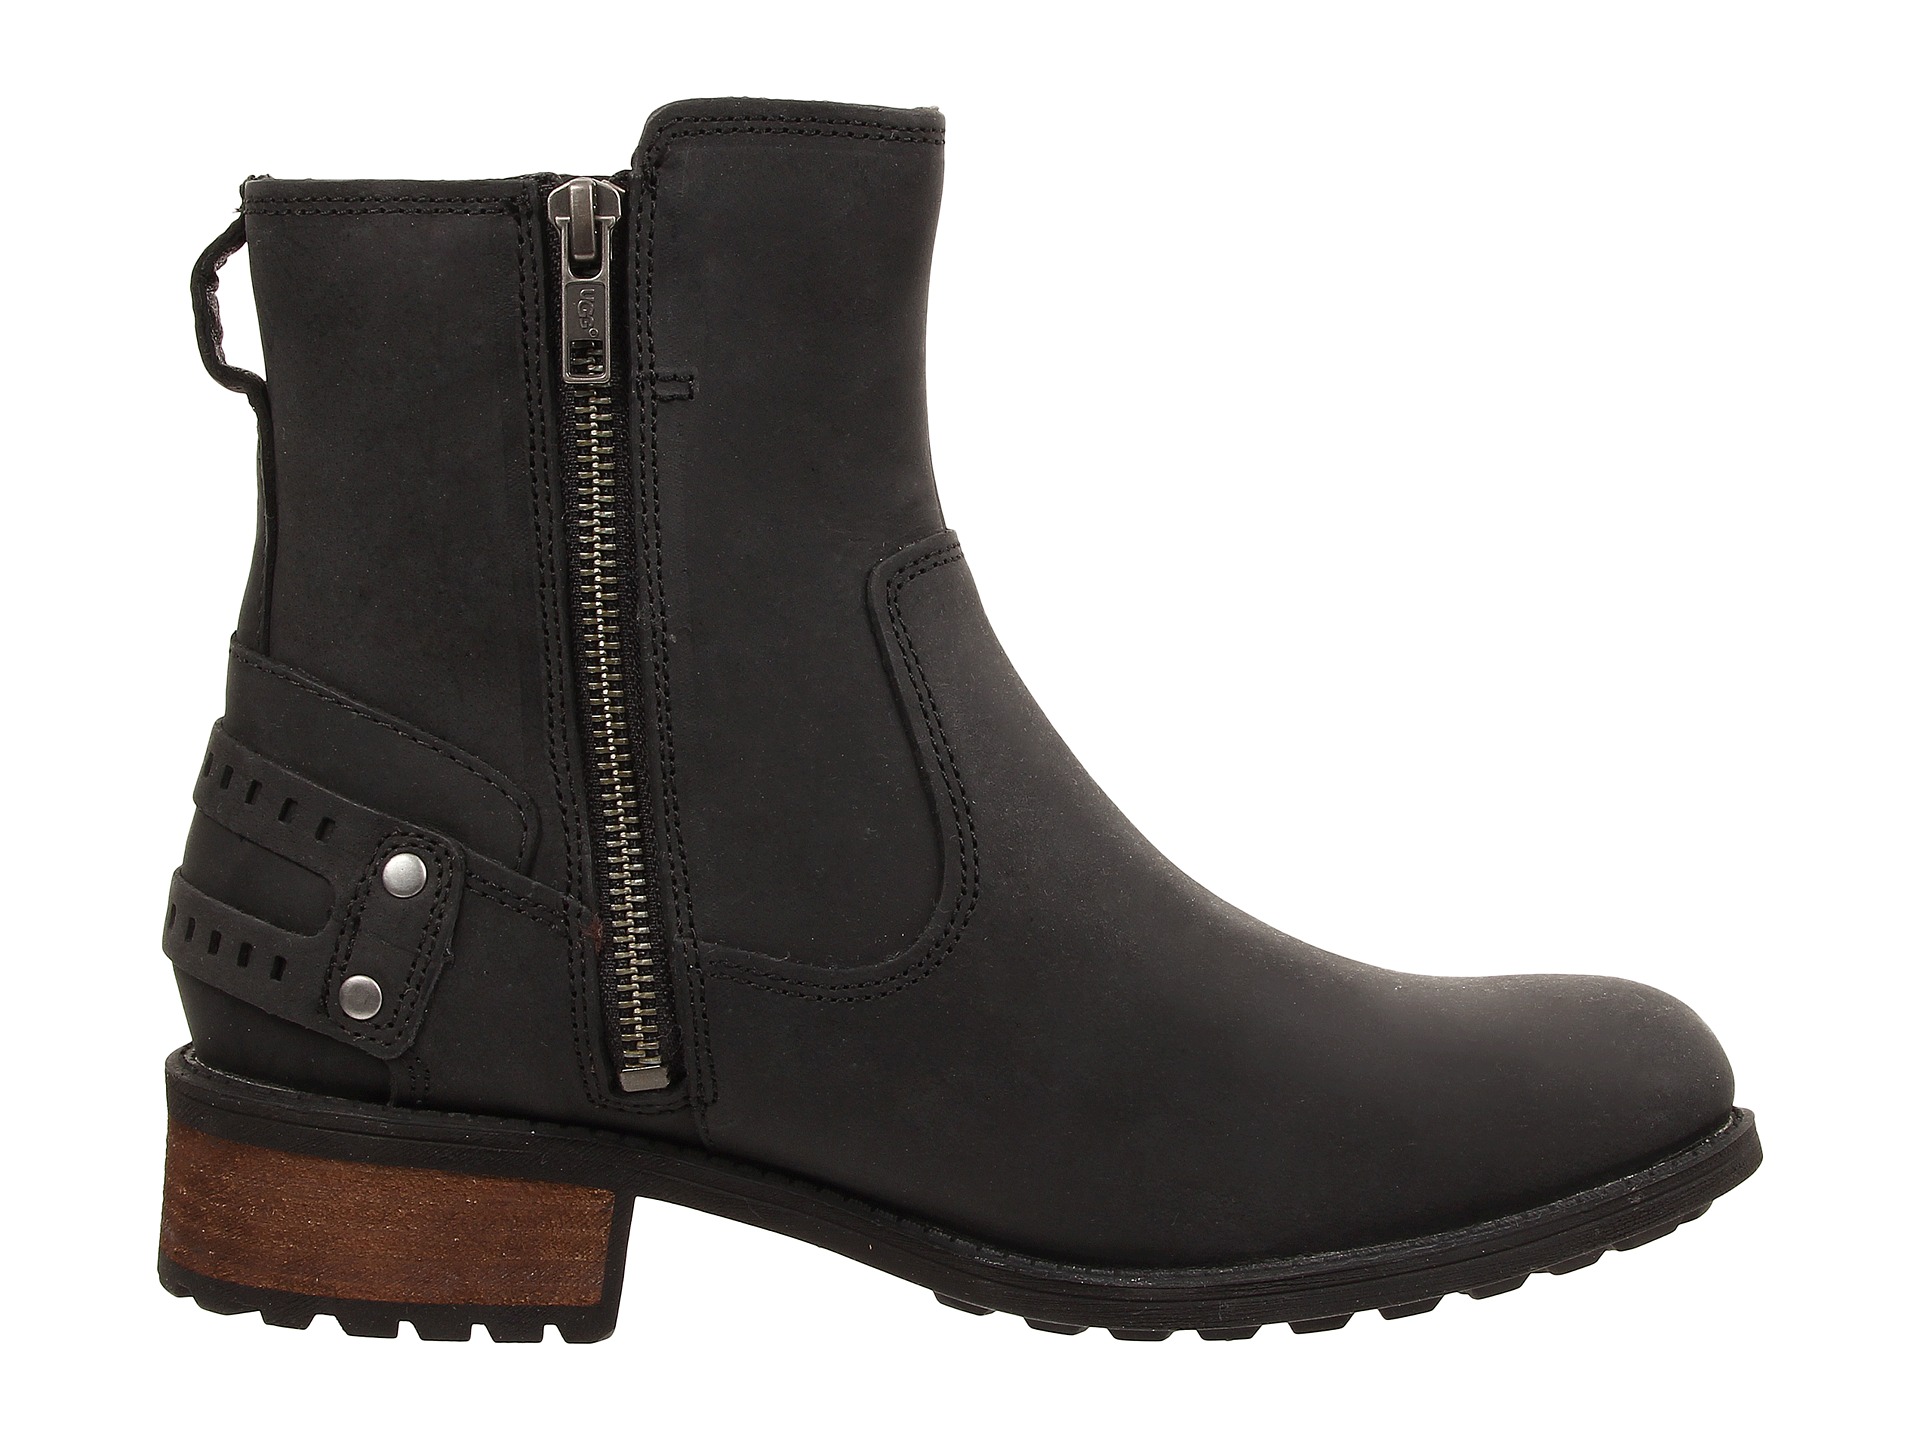 UGG Orion - Zappos.com Free Shipping BOTH Ways